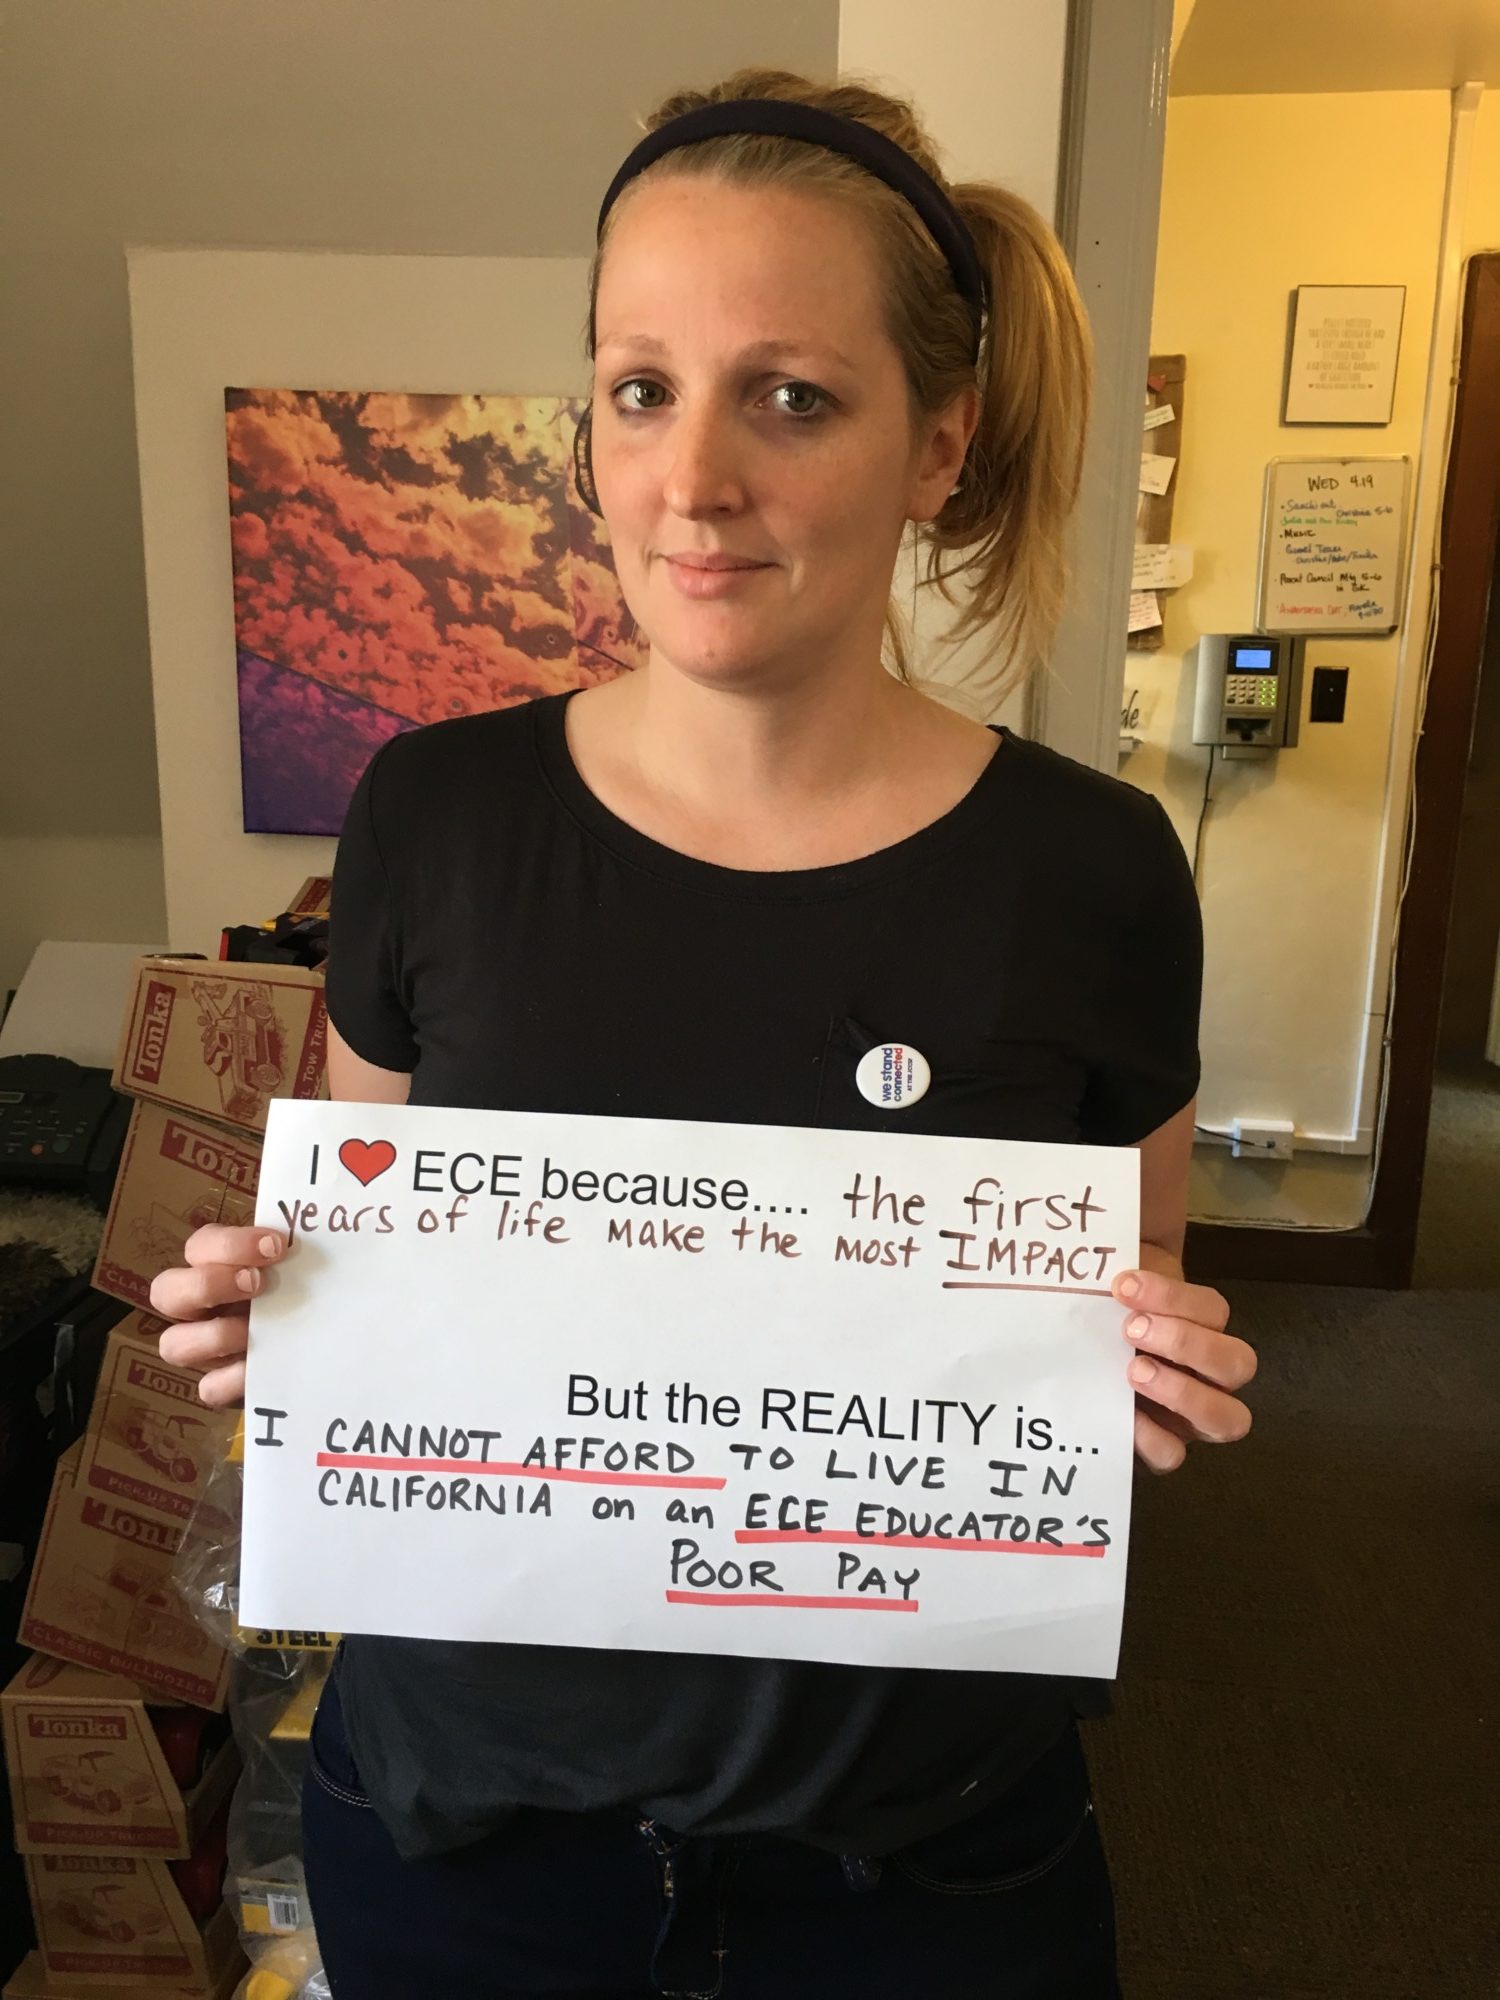 I love ECE because the first years of life make the most IMPACT. But the reality is... I cannot afford to live in California on an ECE educator's poor pay.